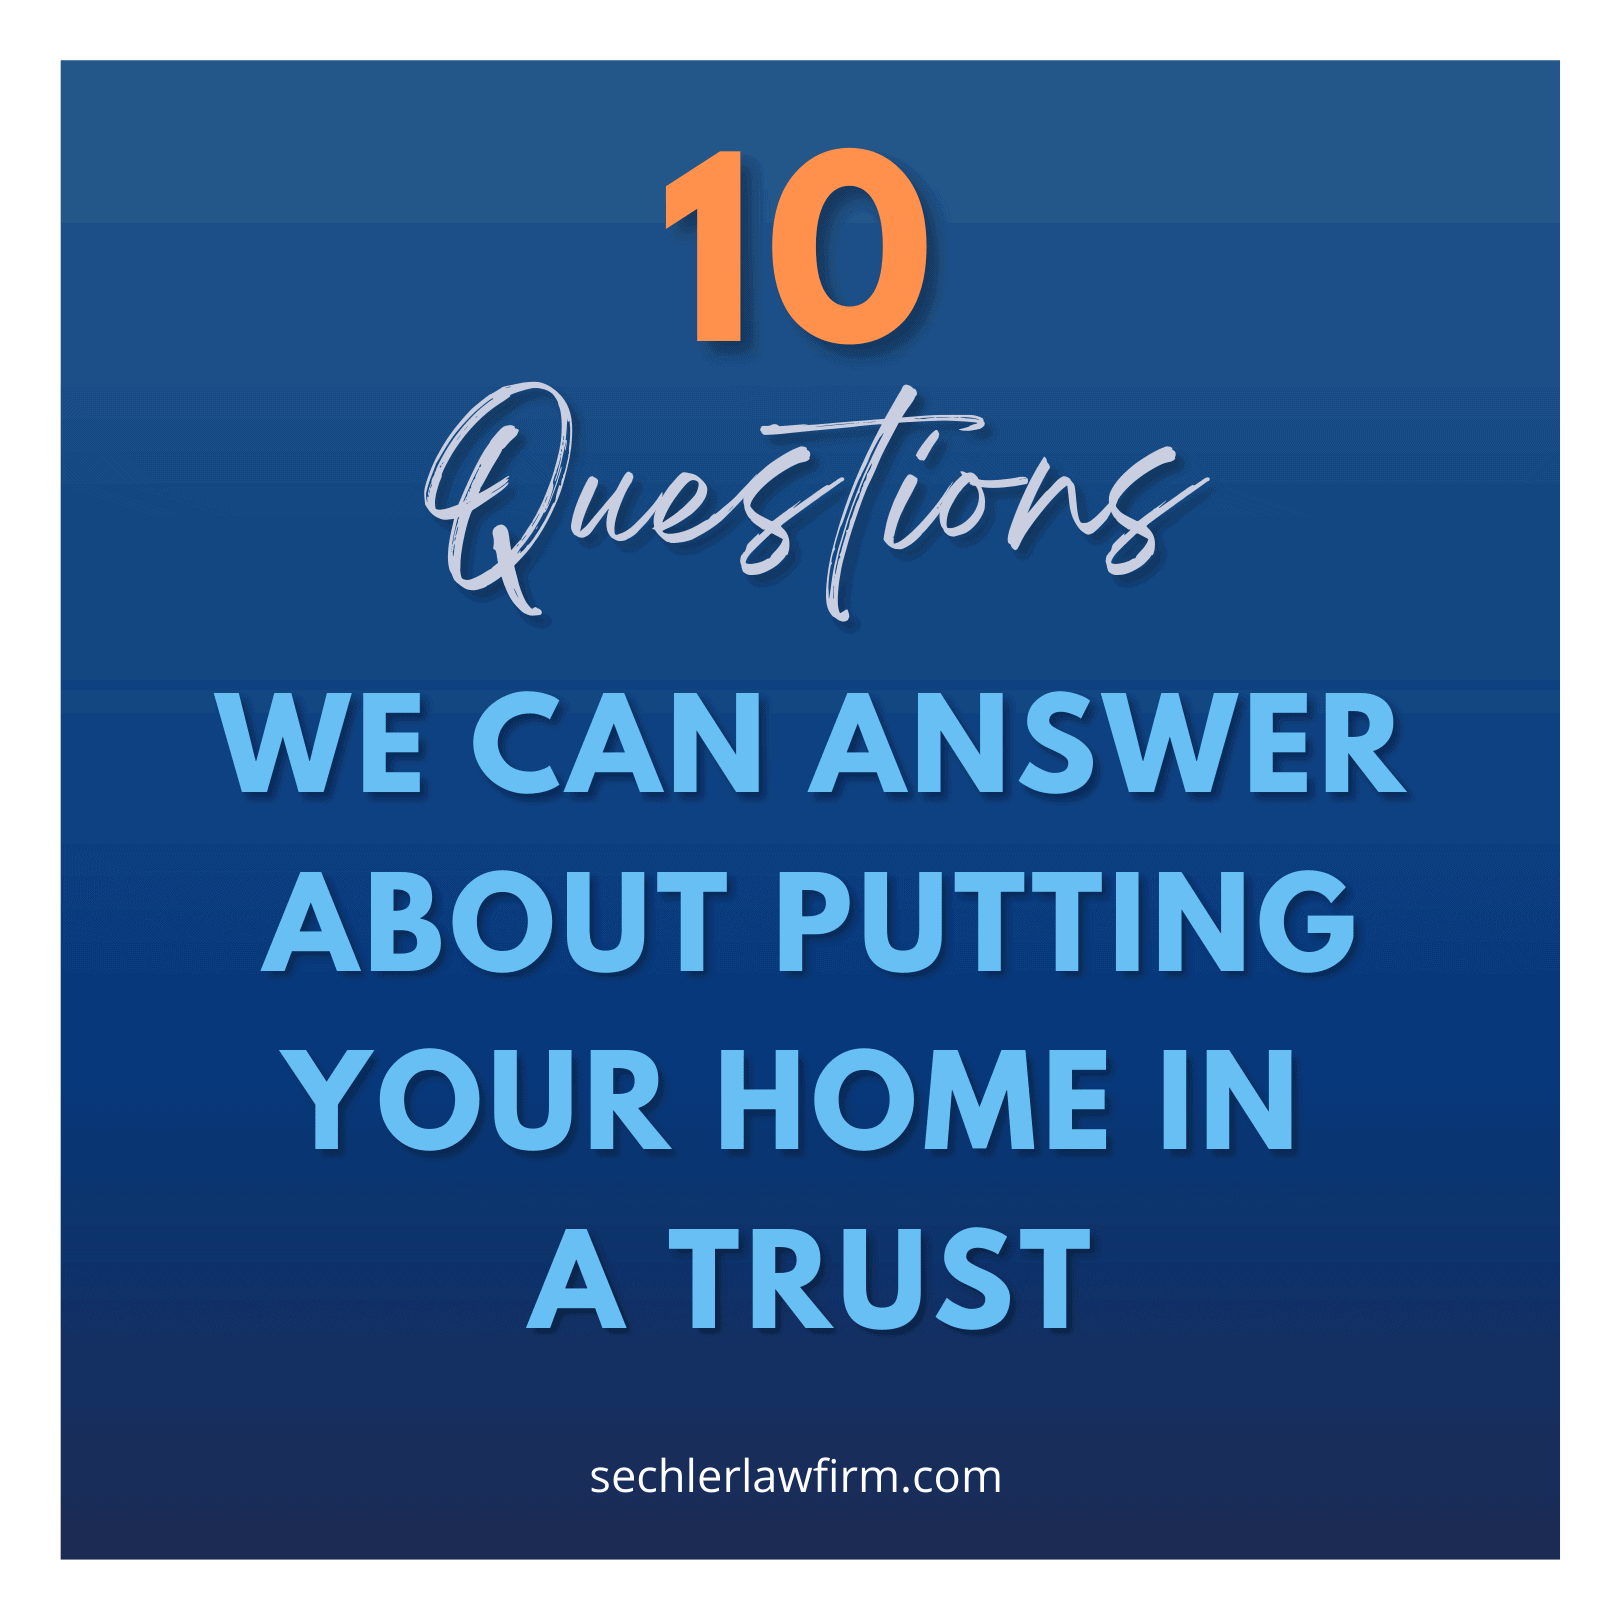 10 Questions We Can Answer About Putting Your Home in a Trust